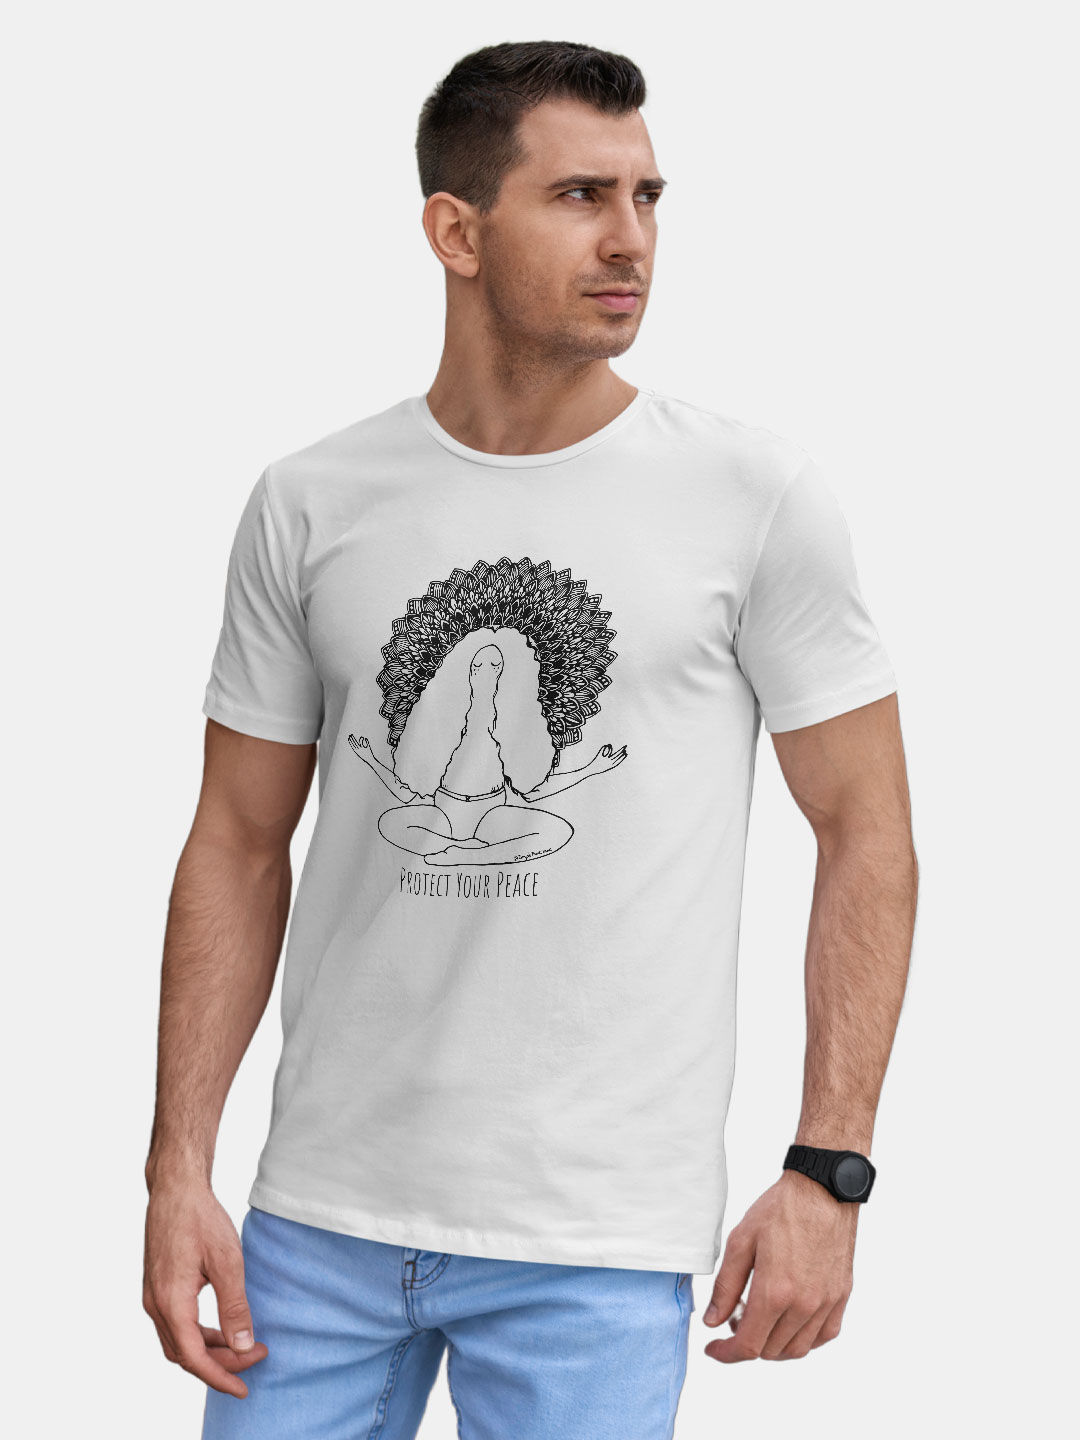 Buy Peace White - Male Designer T-Shirts T-Shirts Online